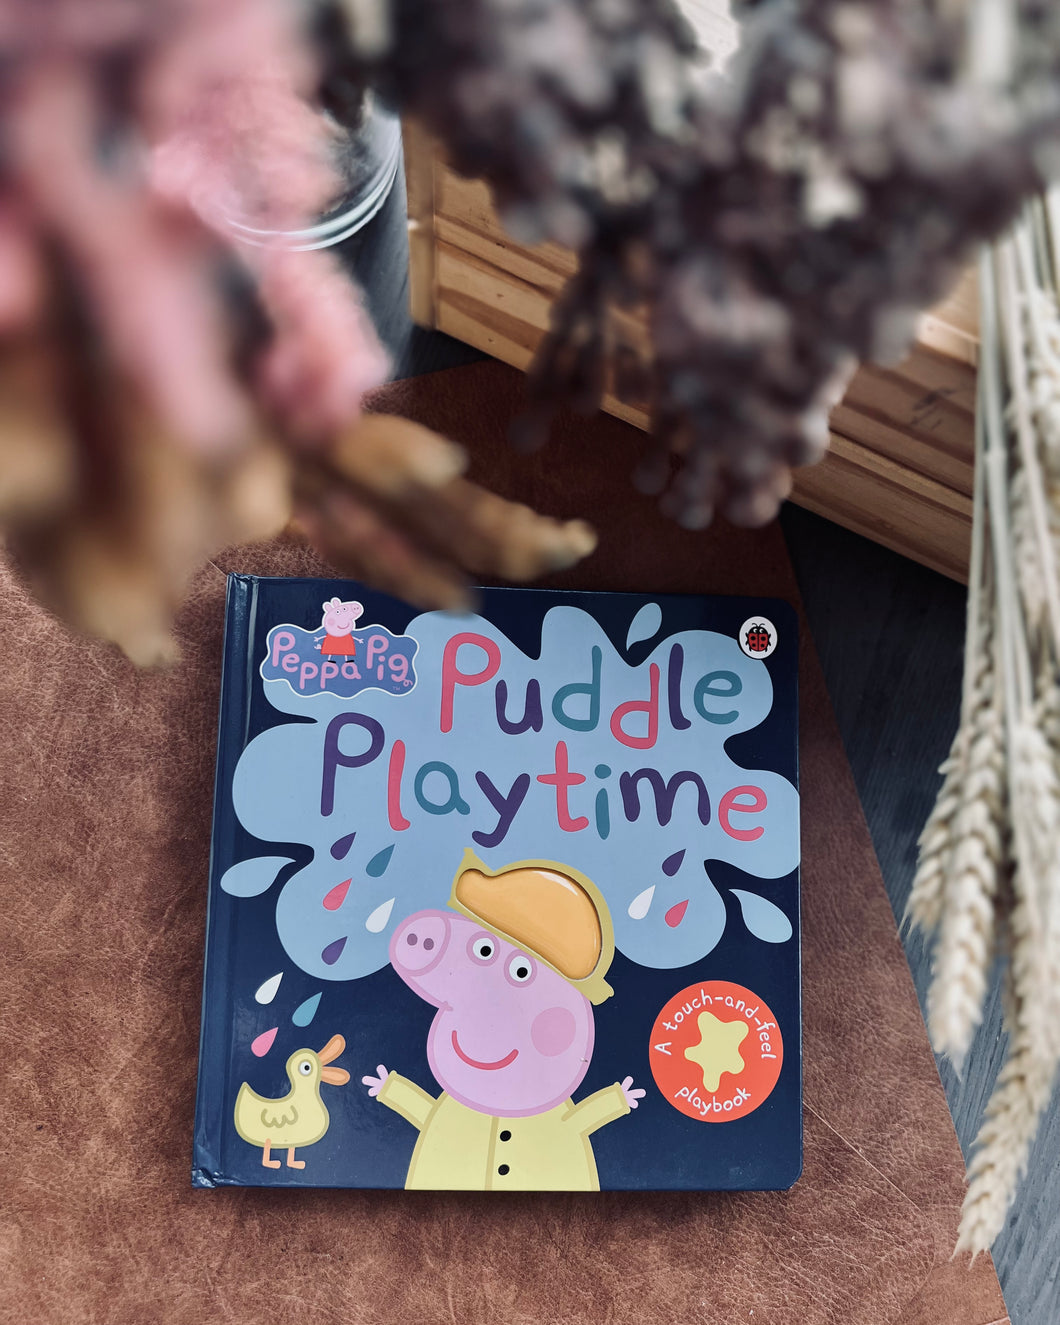 Peppa Pig Puddle Playtime A Touch-and-Feel Playbook